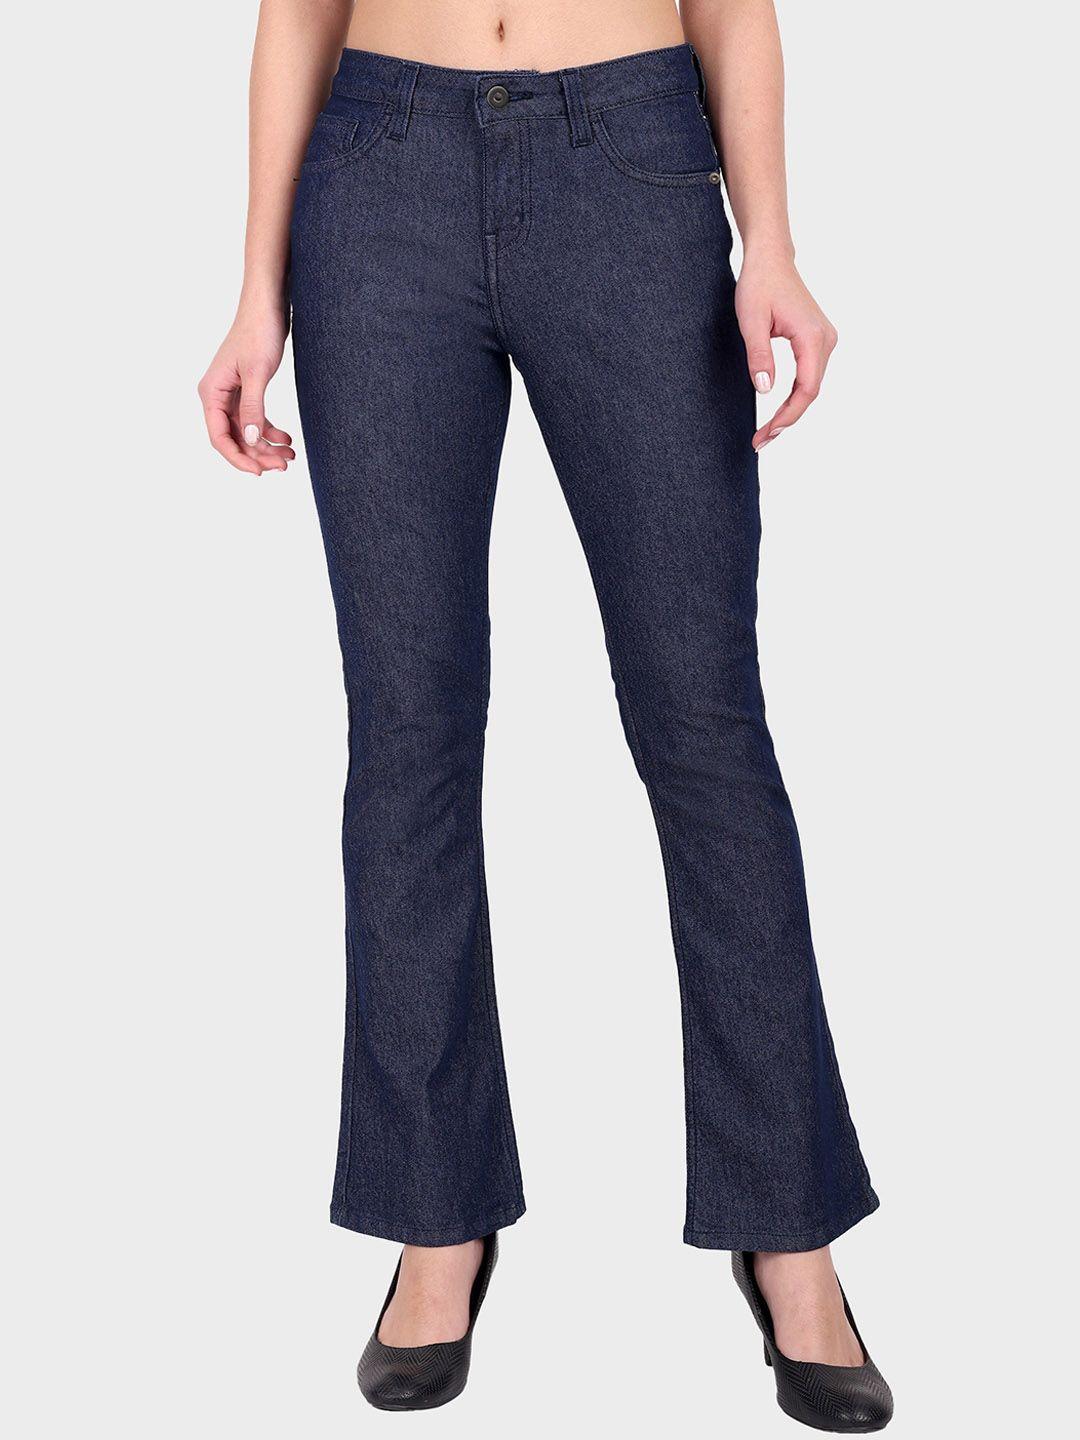 mast-&-harbour-women-navy-blue-bootcut-stretchable-jeans